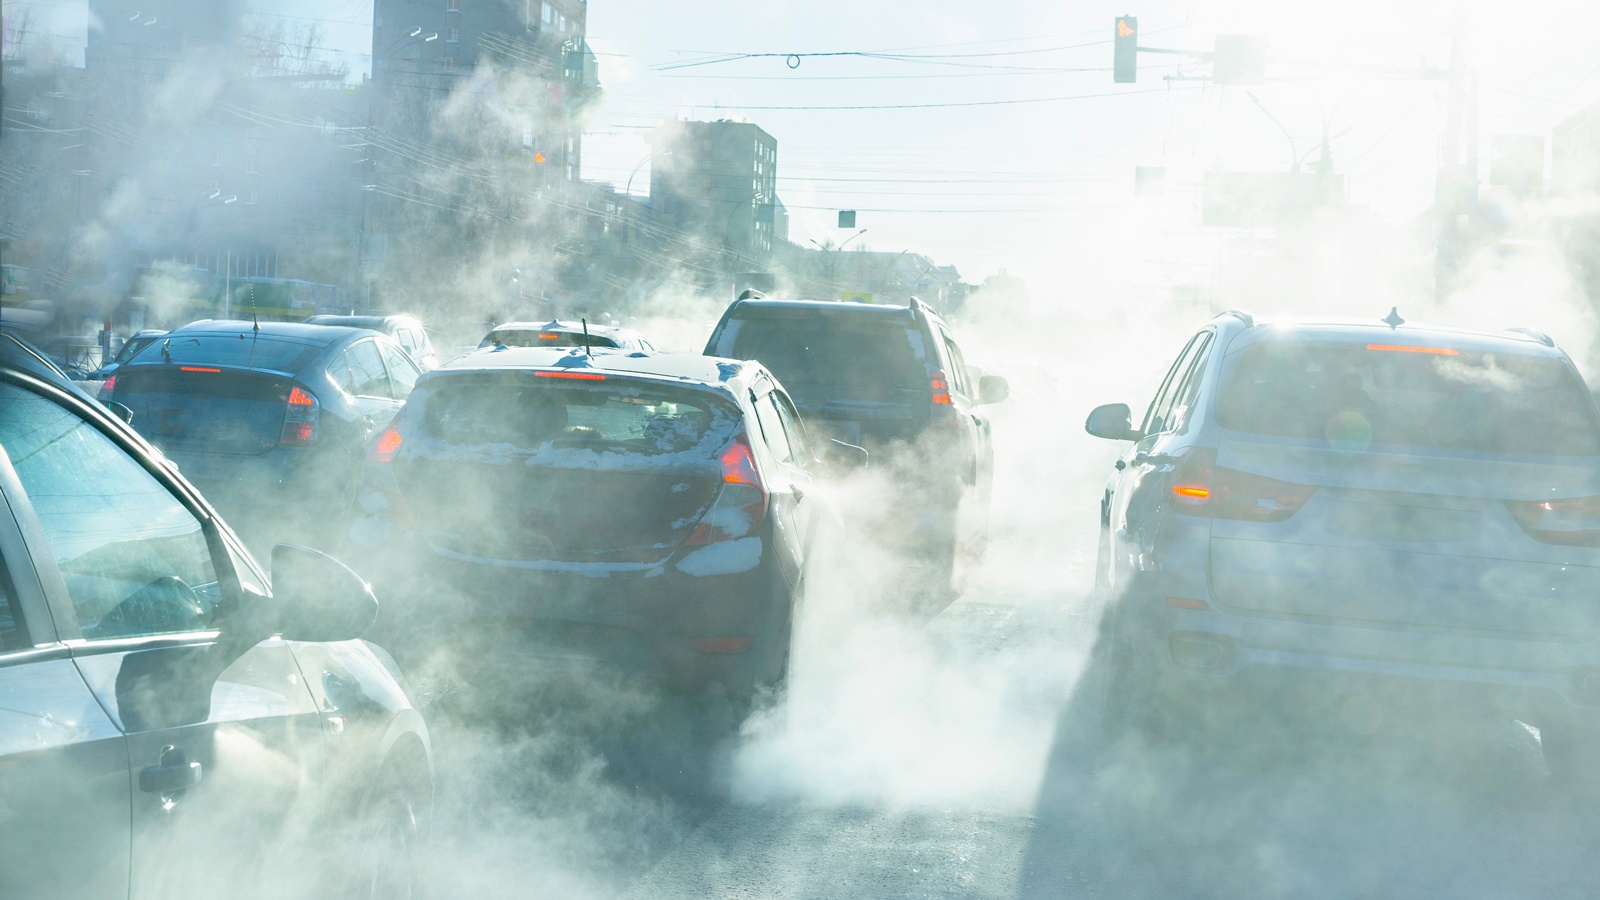 Traffic pollution exposure reduces the ability to live independently in later life, study finds